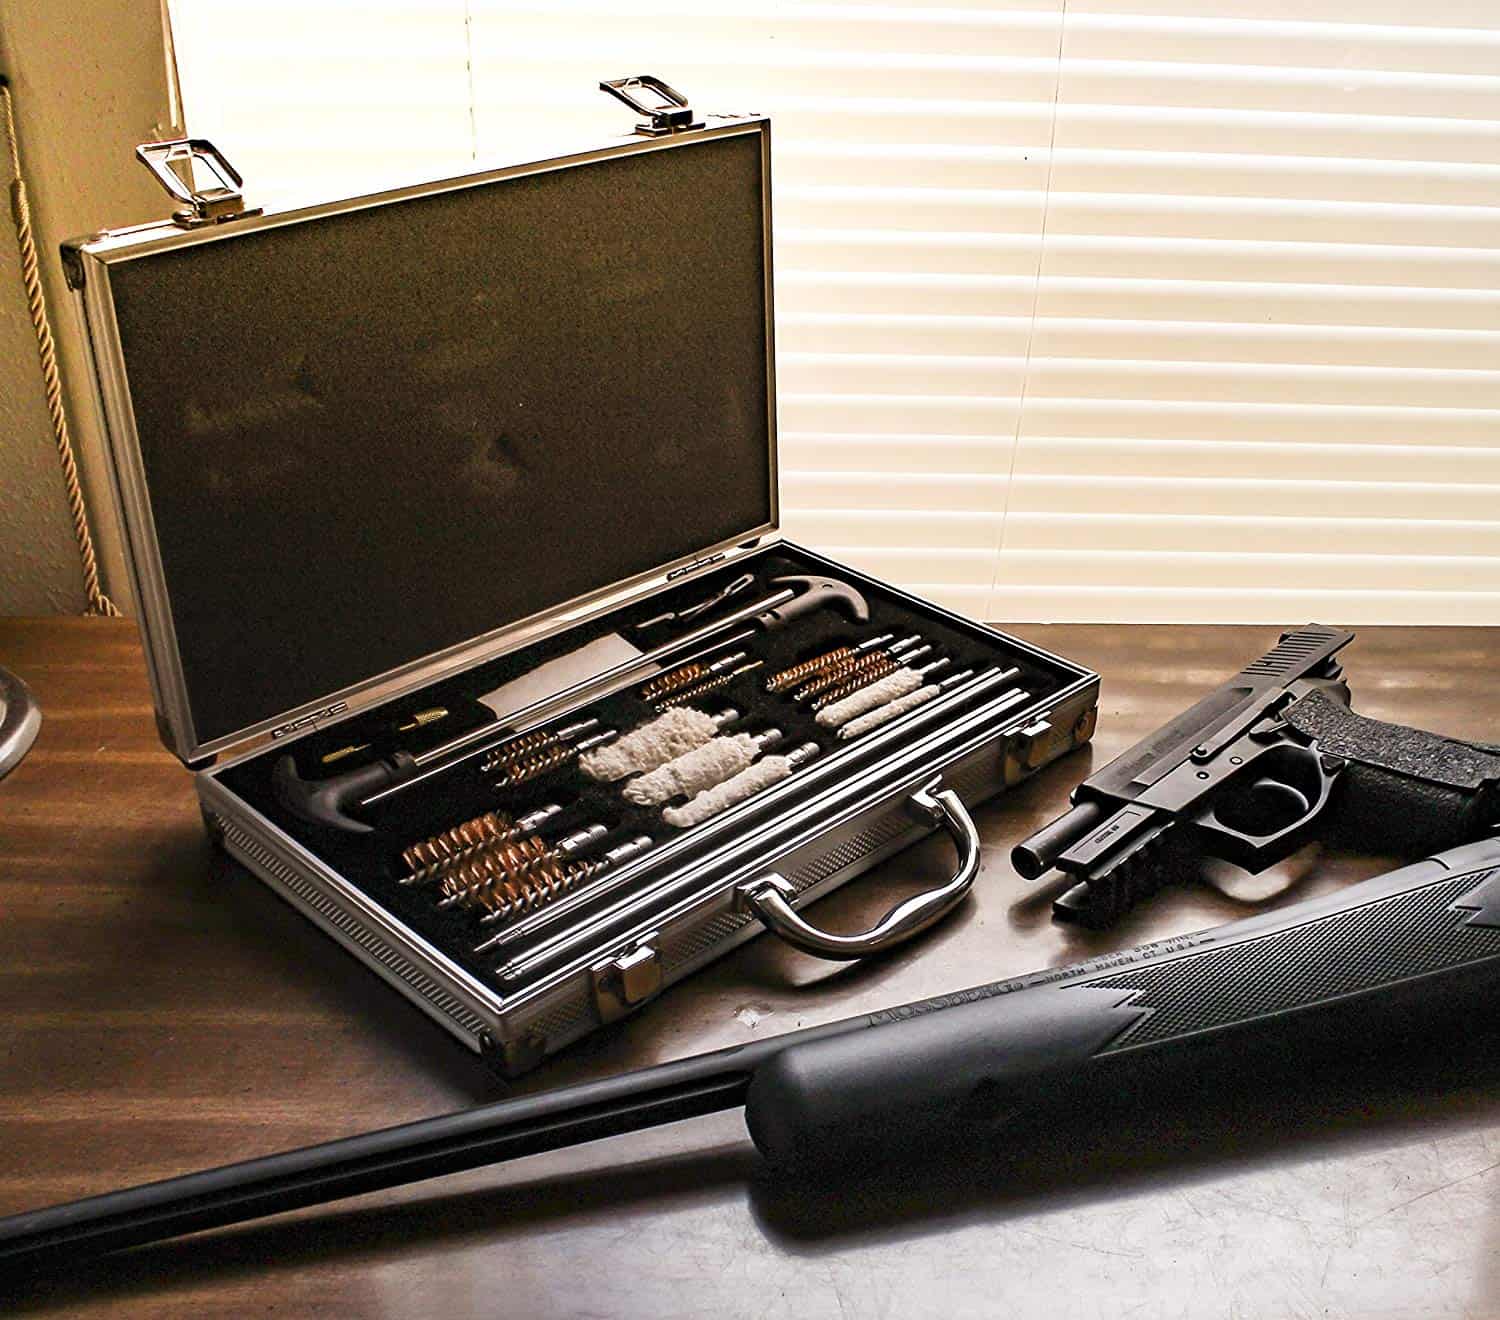 Best Gun Cleaning Kits – the Top 11 for Rifles, Pistols, and Shotguns in 2021